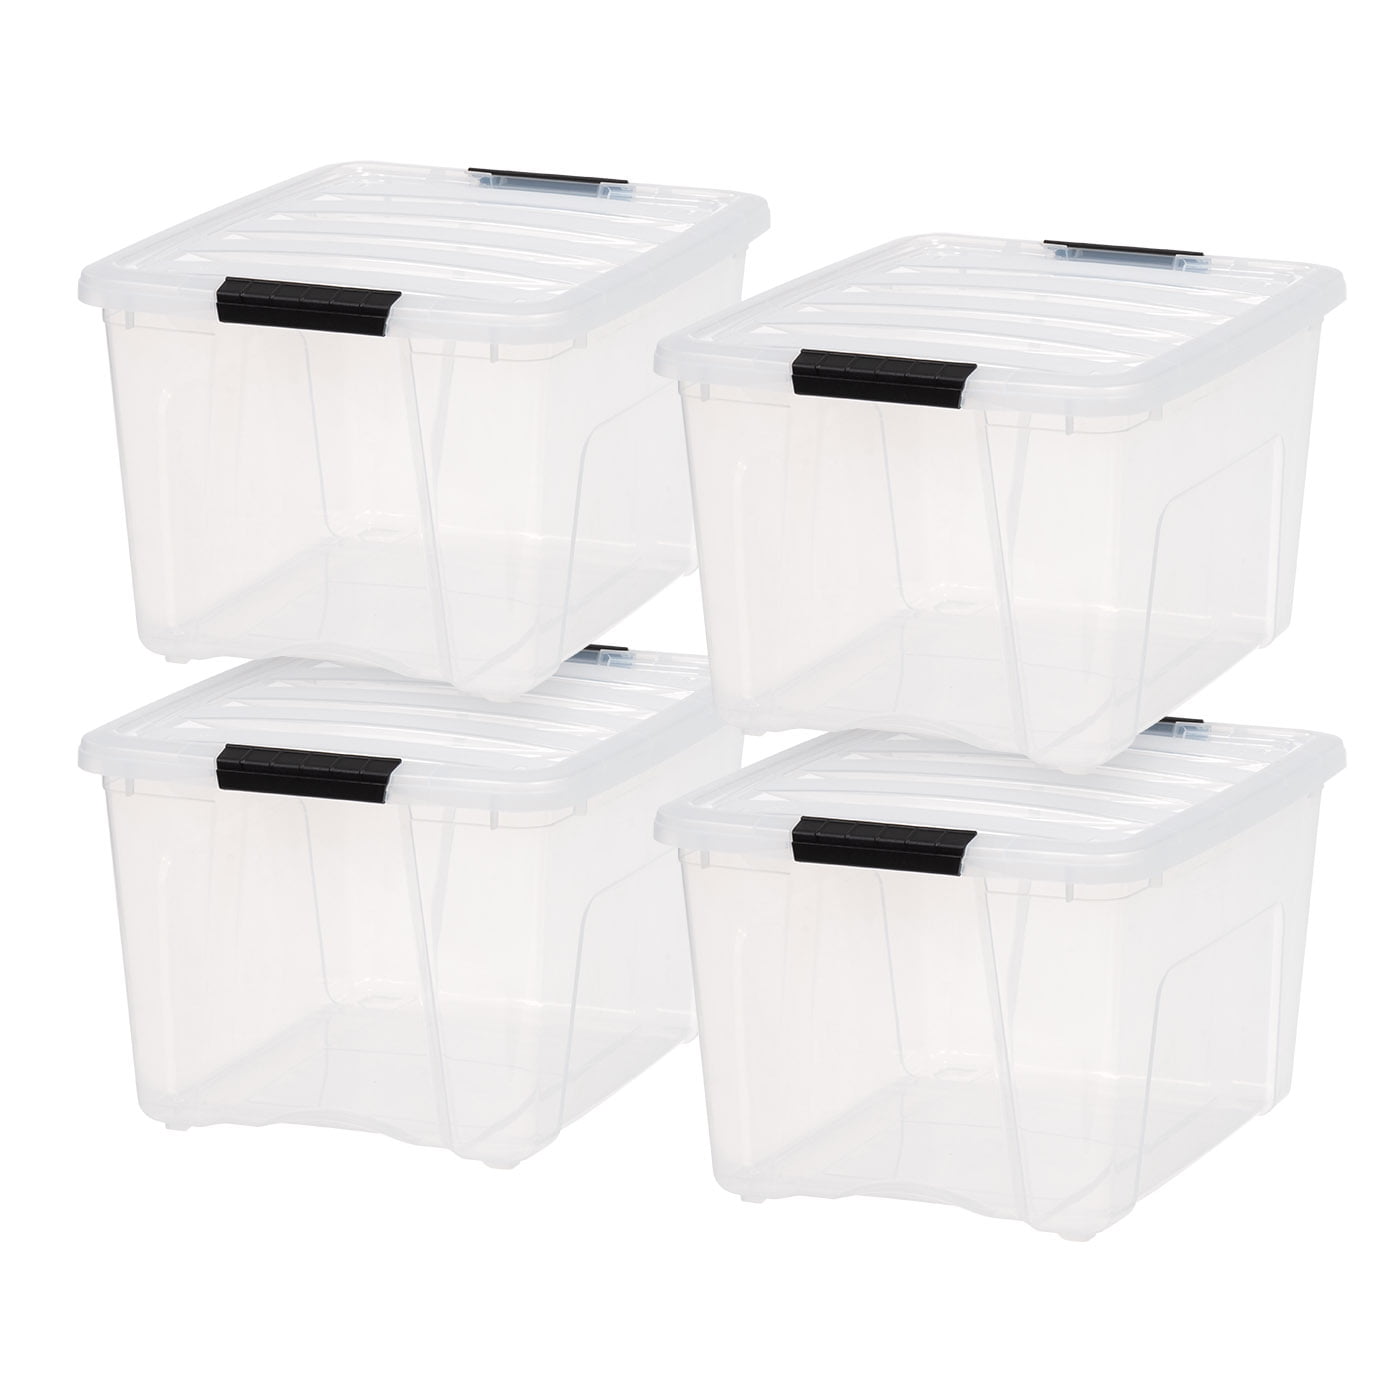 IRIS USA 4 Pack 40qt Clear View Plastic Storage Bin with Lid and Secure ...